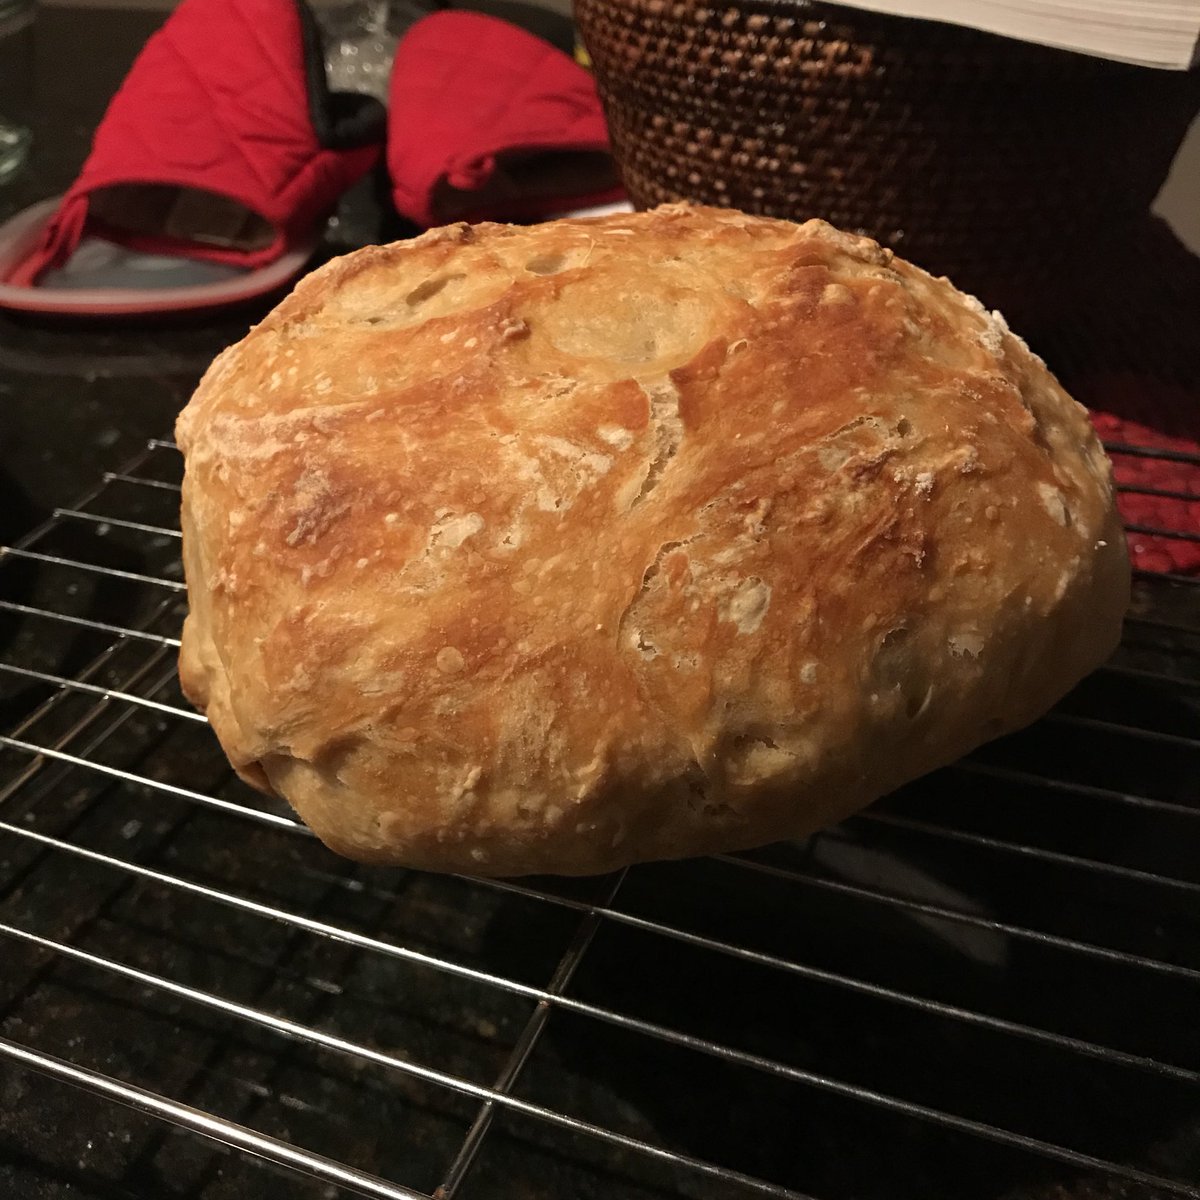 Bread #4: Almost No-Knead Bread. So, the idea of this bread is supposed to be that you can make an artisan-style loaf very easily. The catch is it takes forever. Very little active time but looonnnng rise. You also need a Dutch oven.